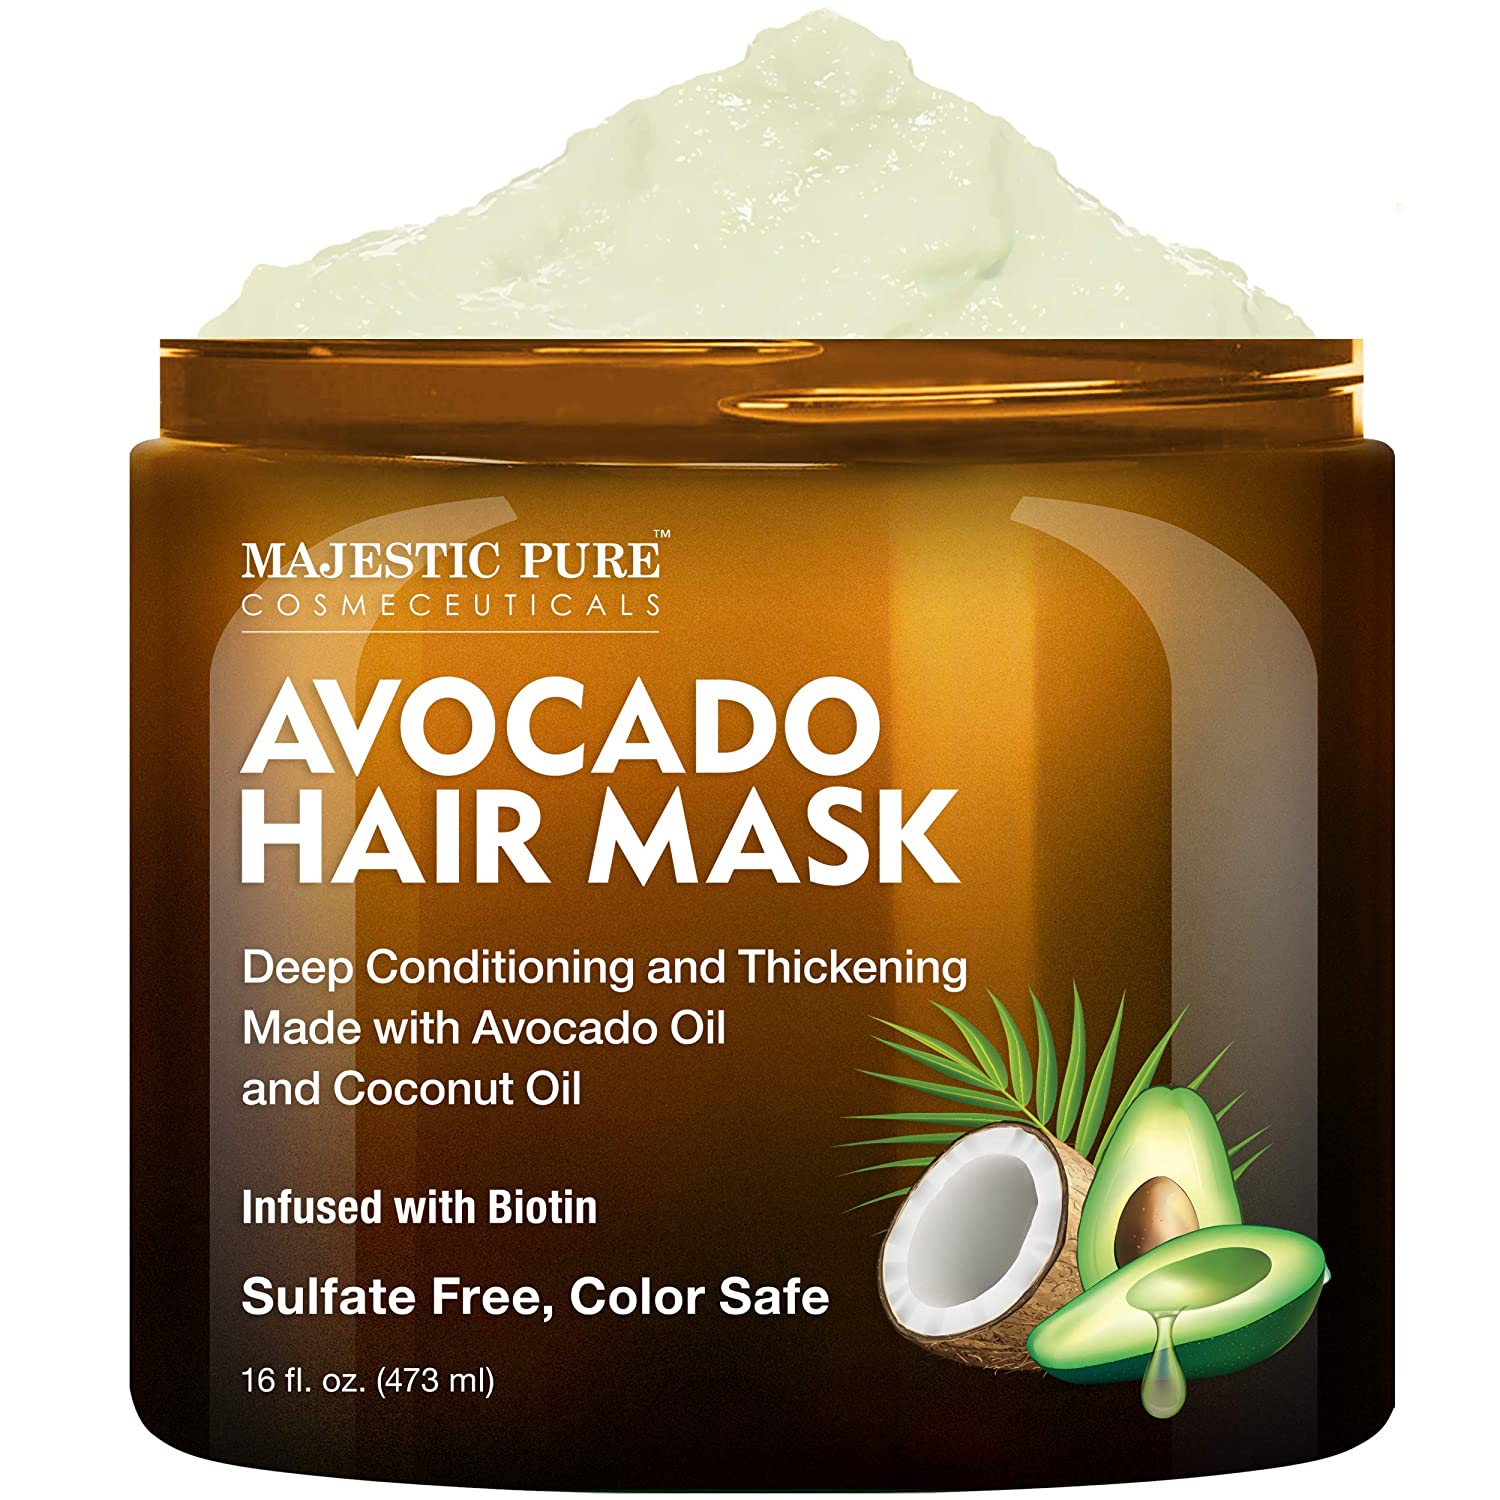 MAJESTIC PURE Avocado and Coconut Hair Mask 